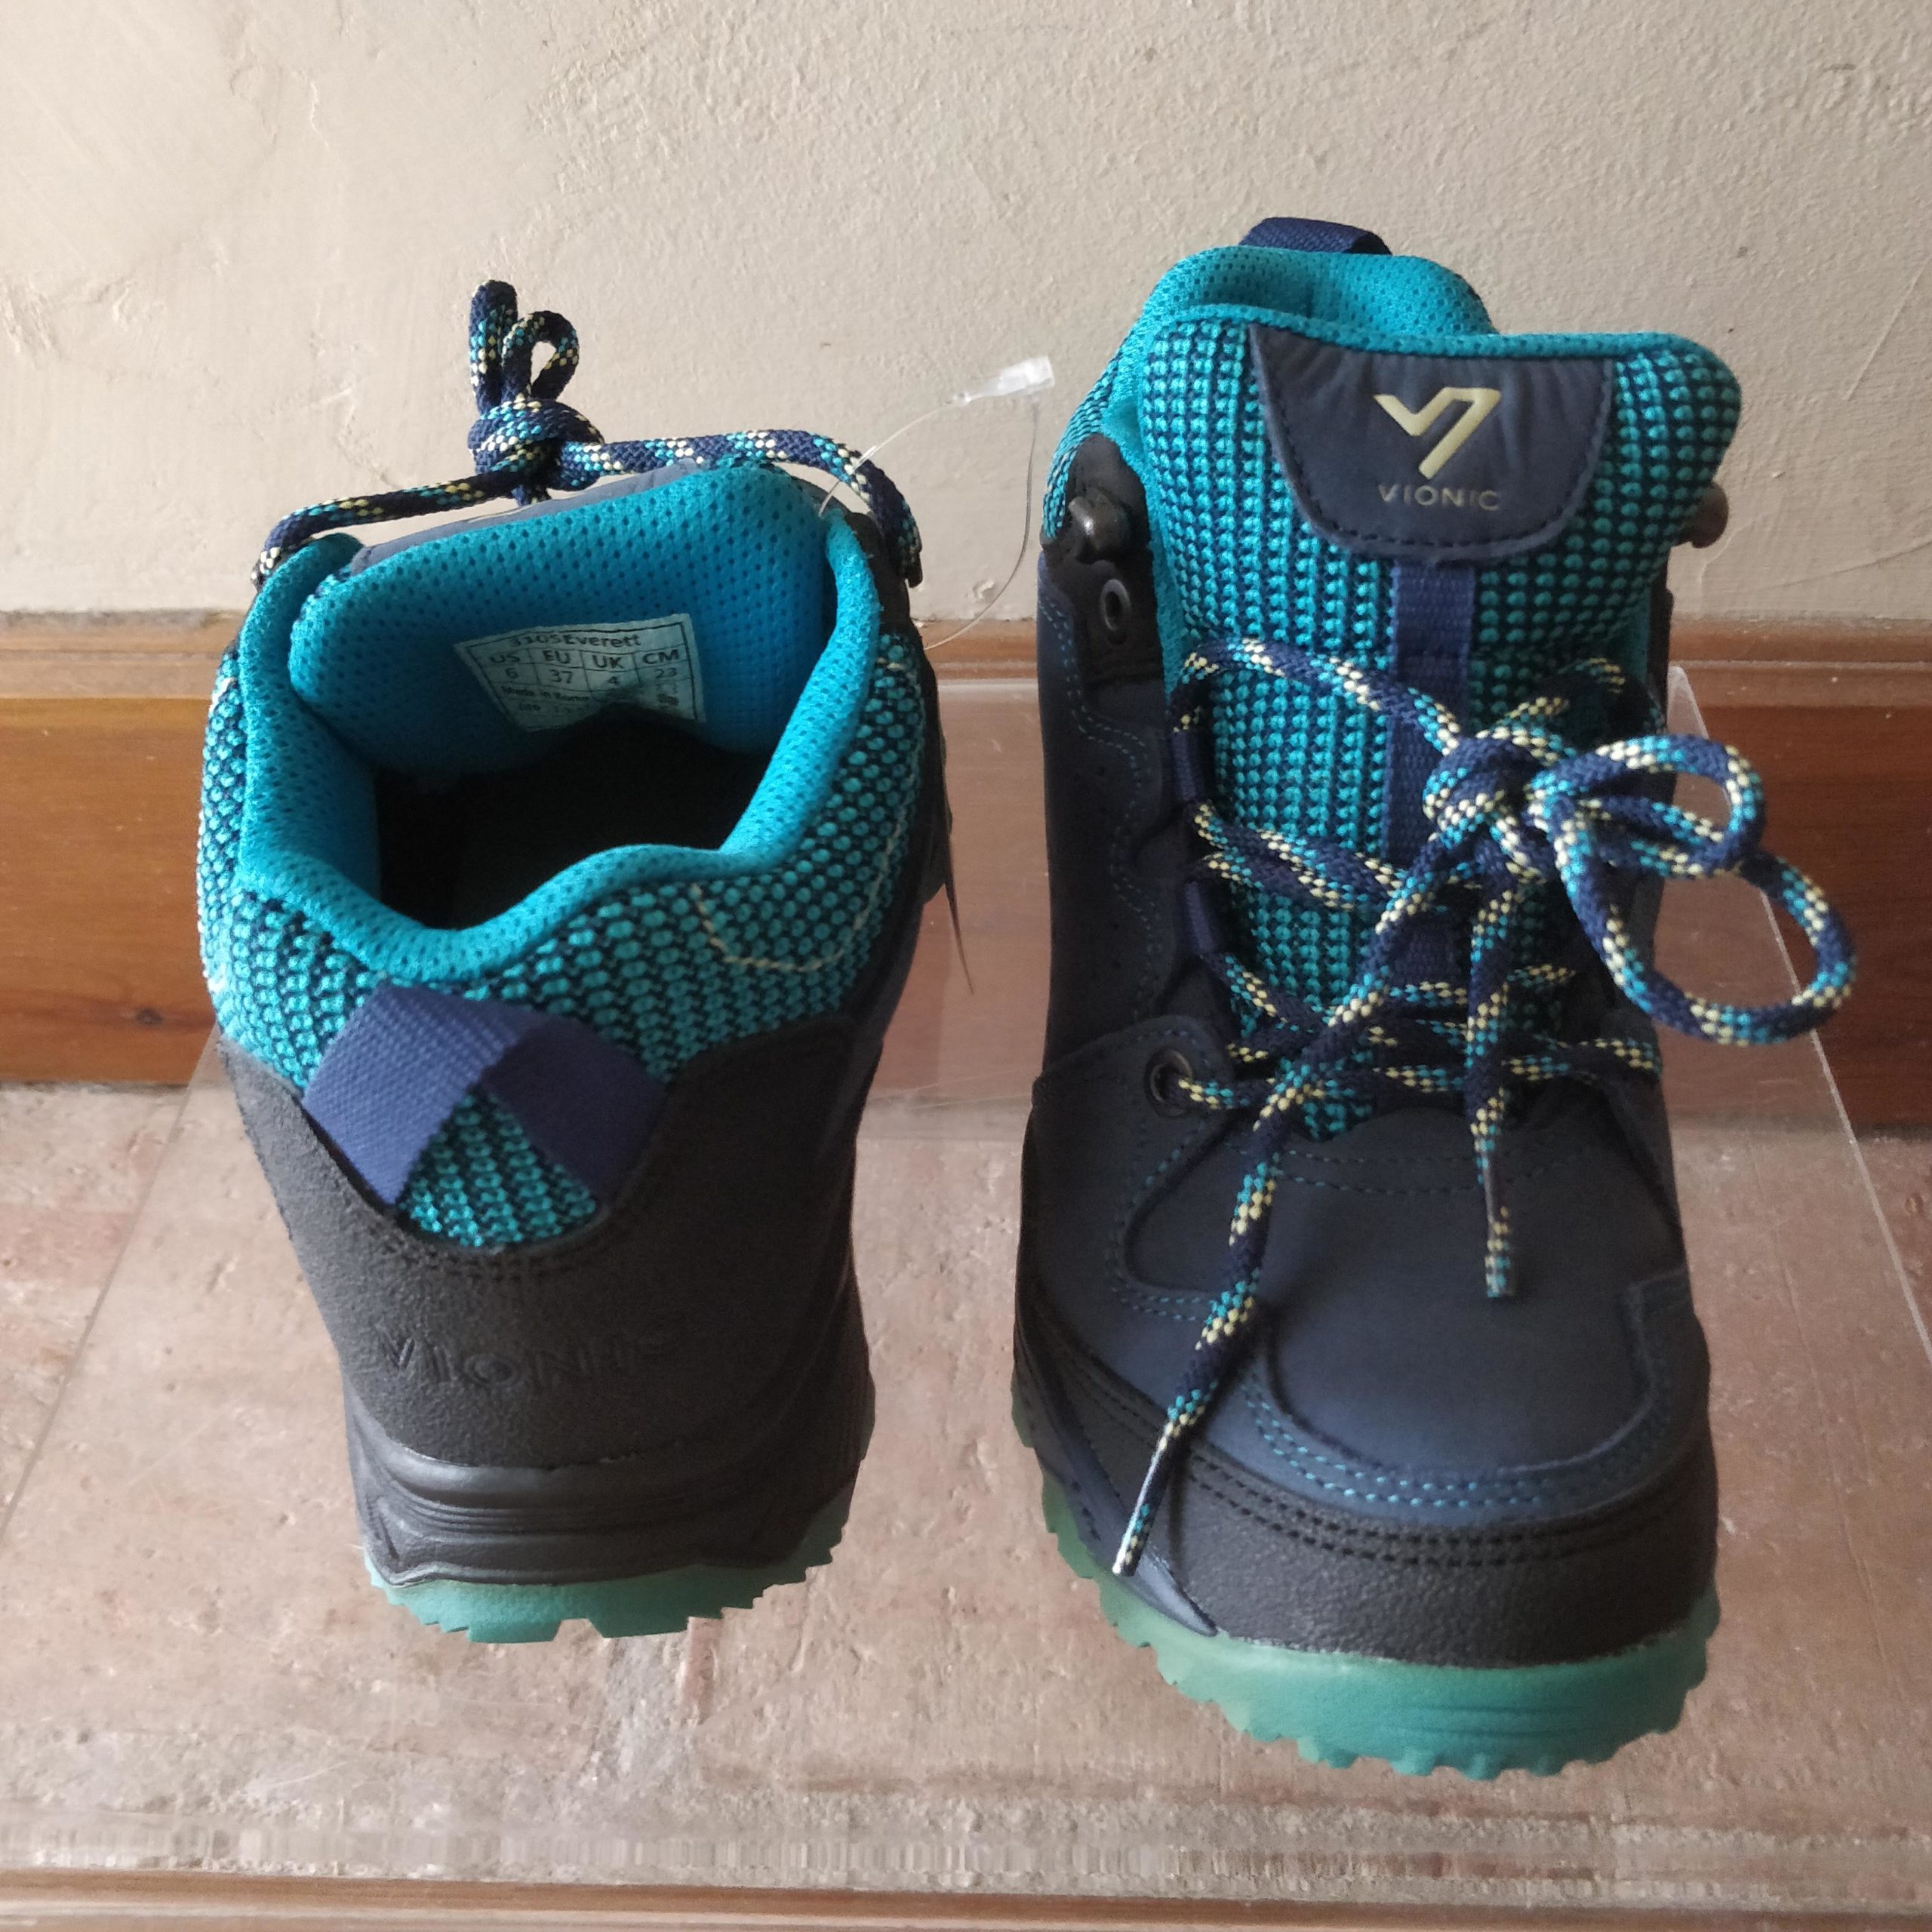 Vionic Everett hiking boots in navy